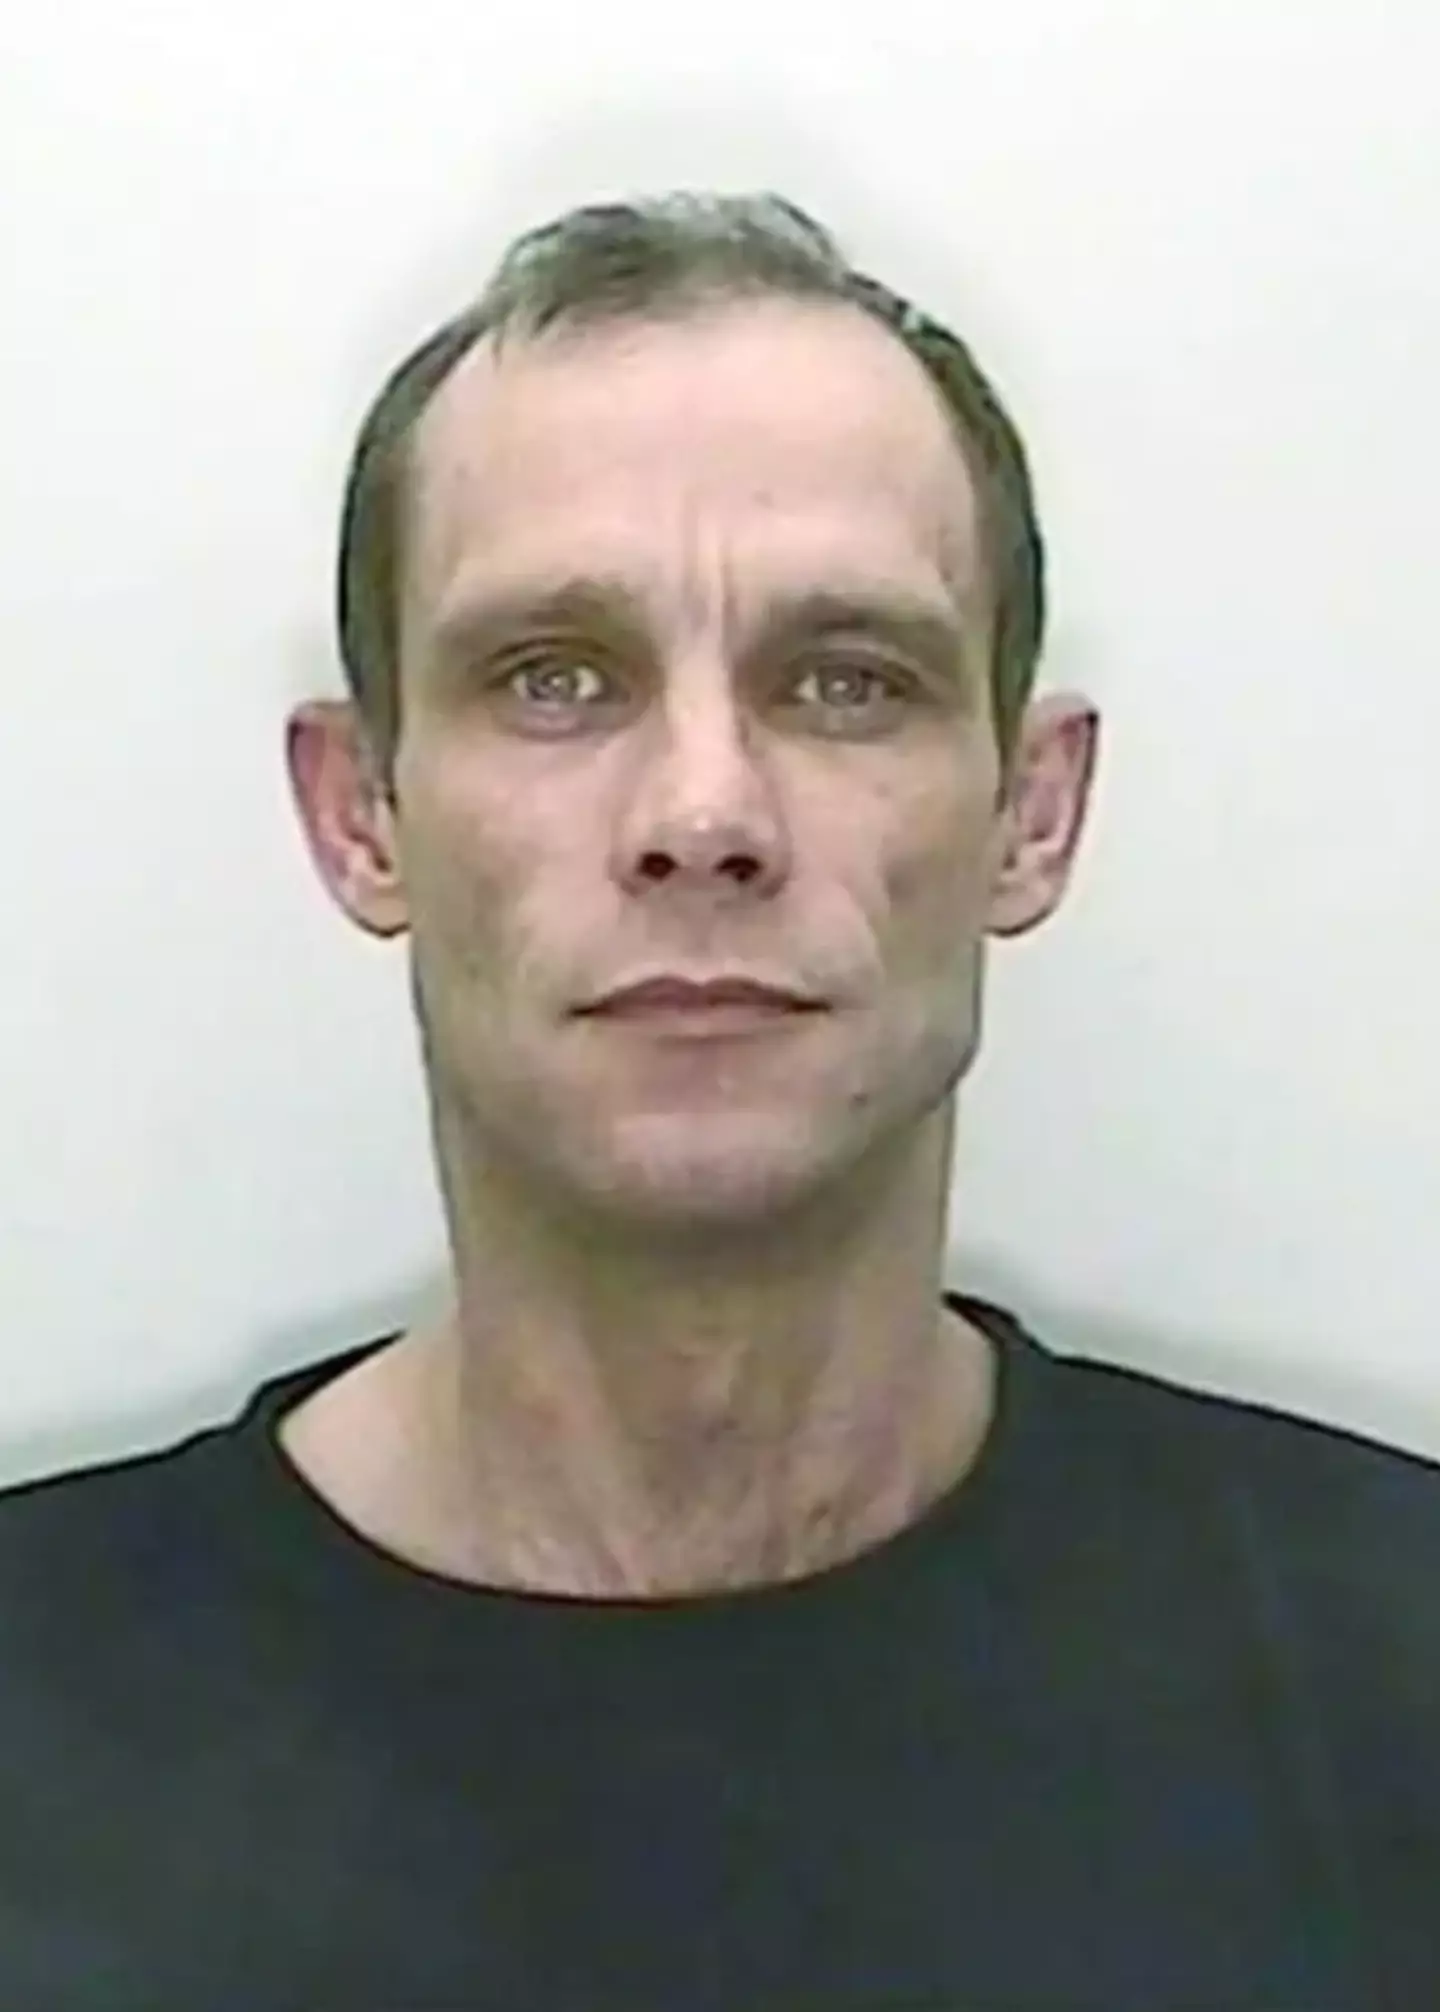 Christopher Halliwell was eventually convicted for both murders.